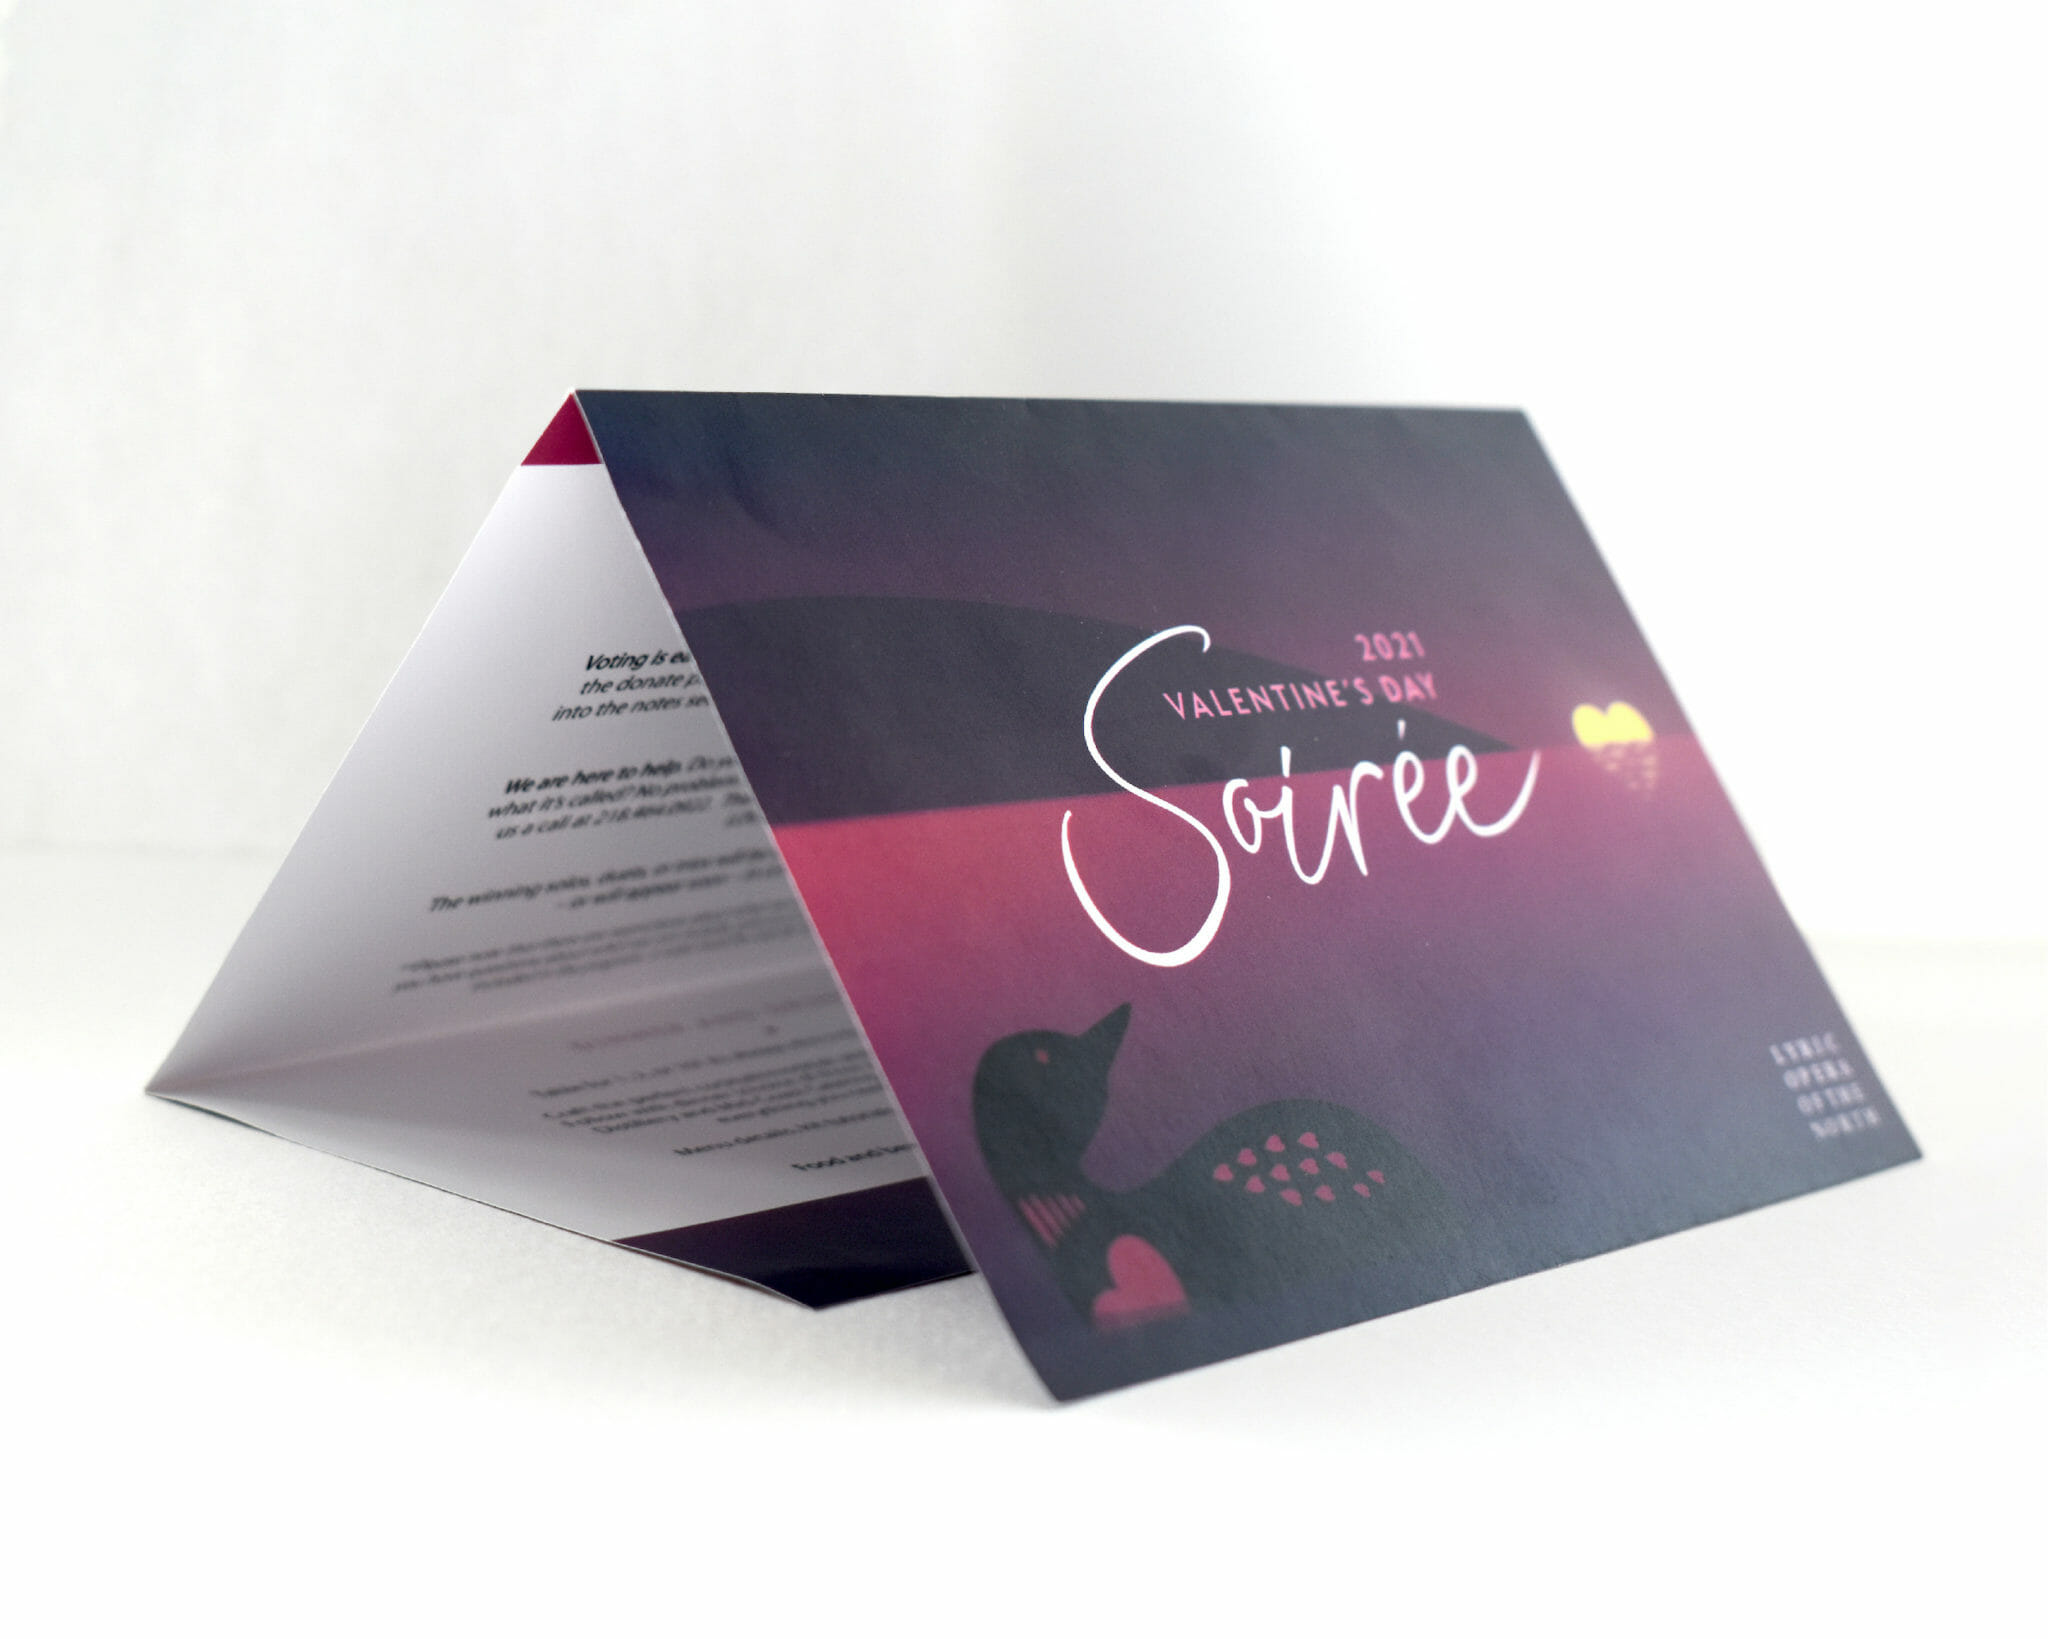 lyric opera of the north 2021 Valentine's Day soirée mailer cover, created by Šek Design Studio